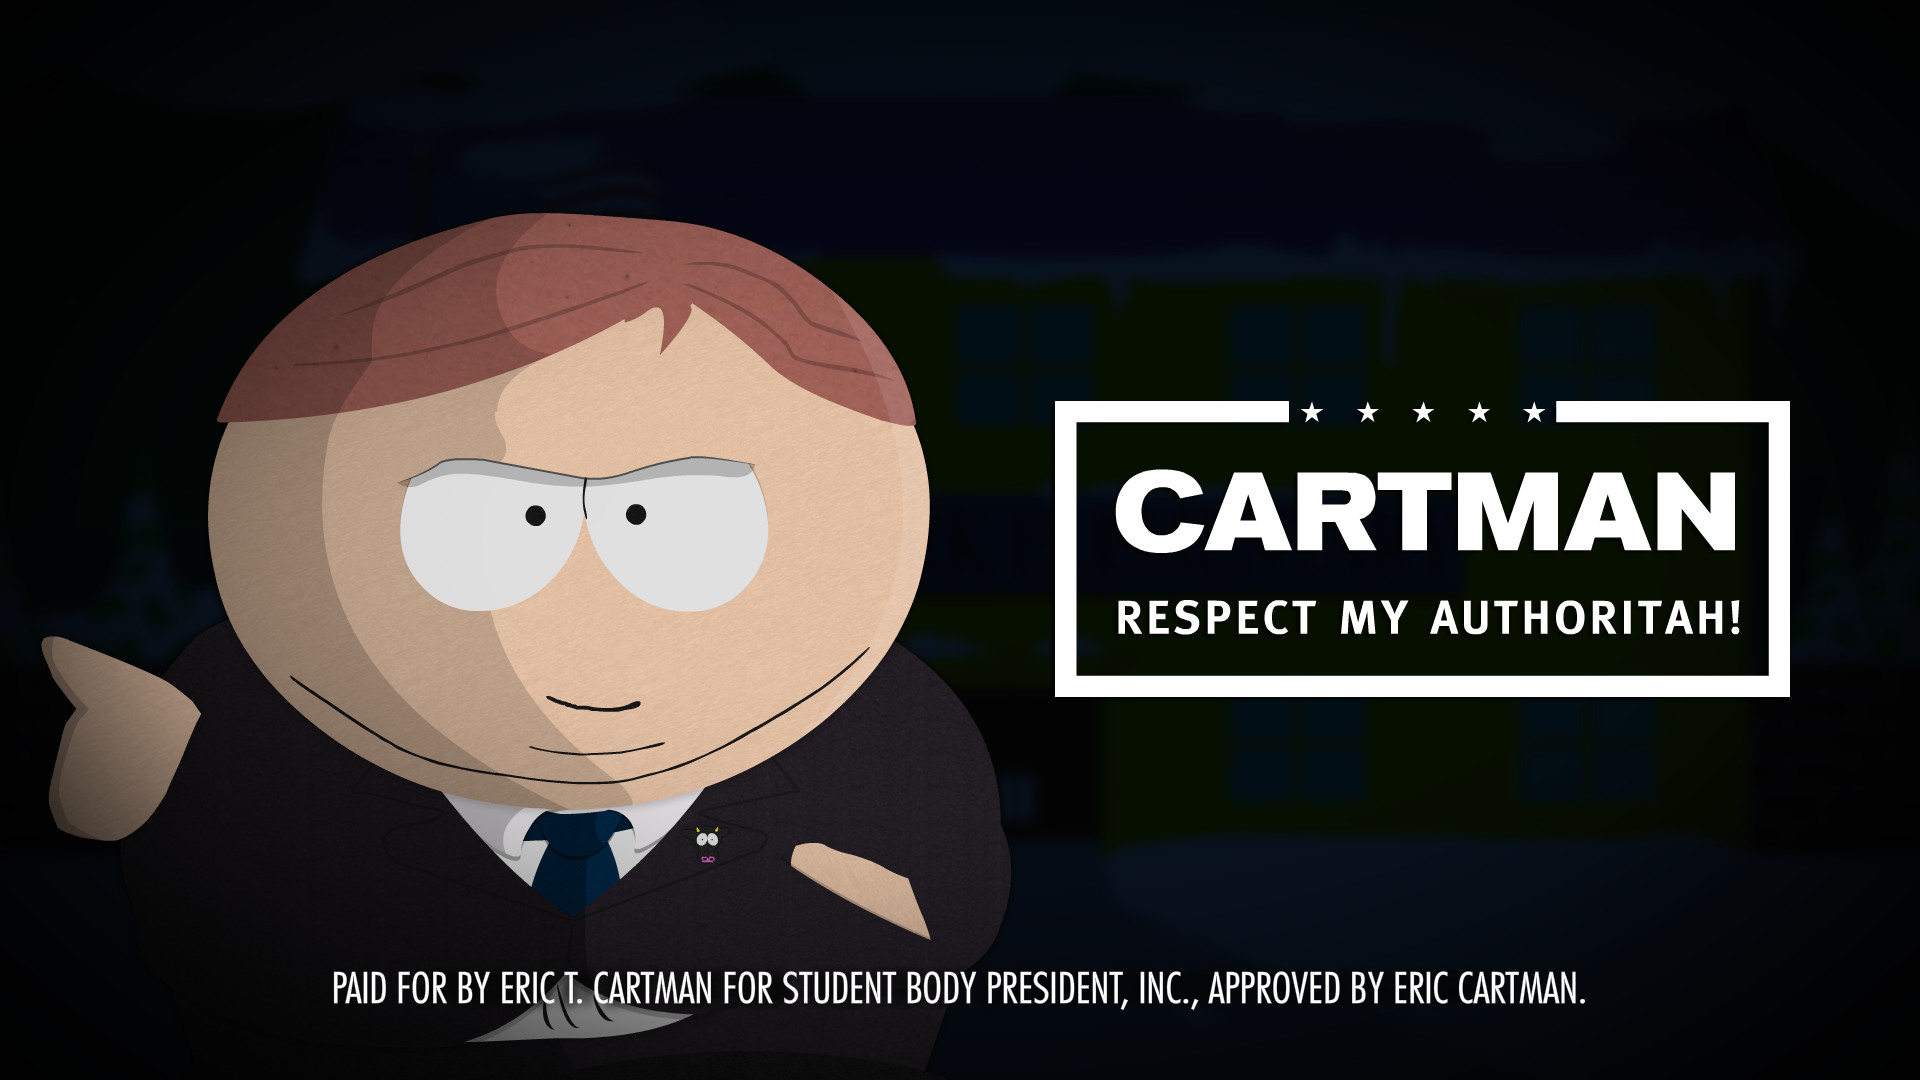 1920x1080 ... Eric Cartman For President [DELETED BY VIACOM] by AnonPaul